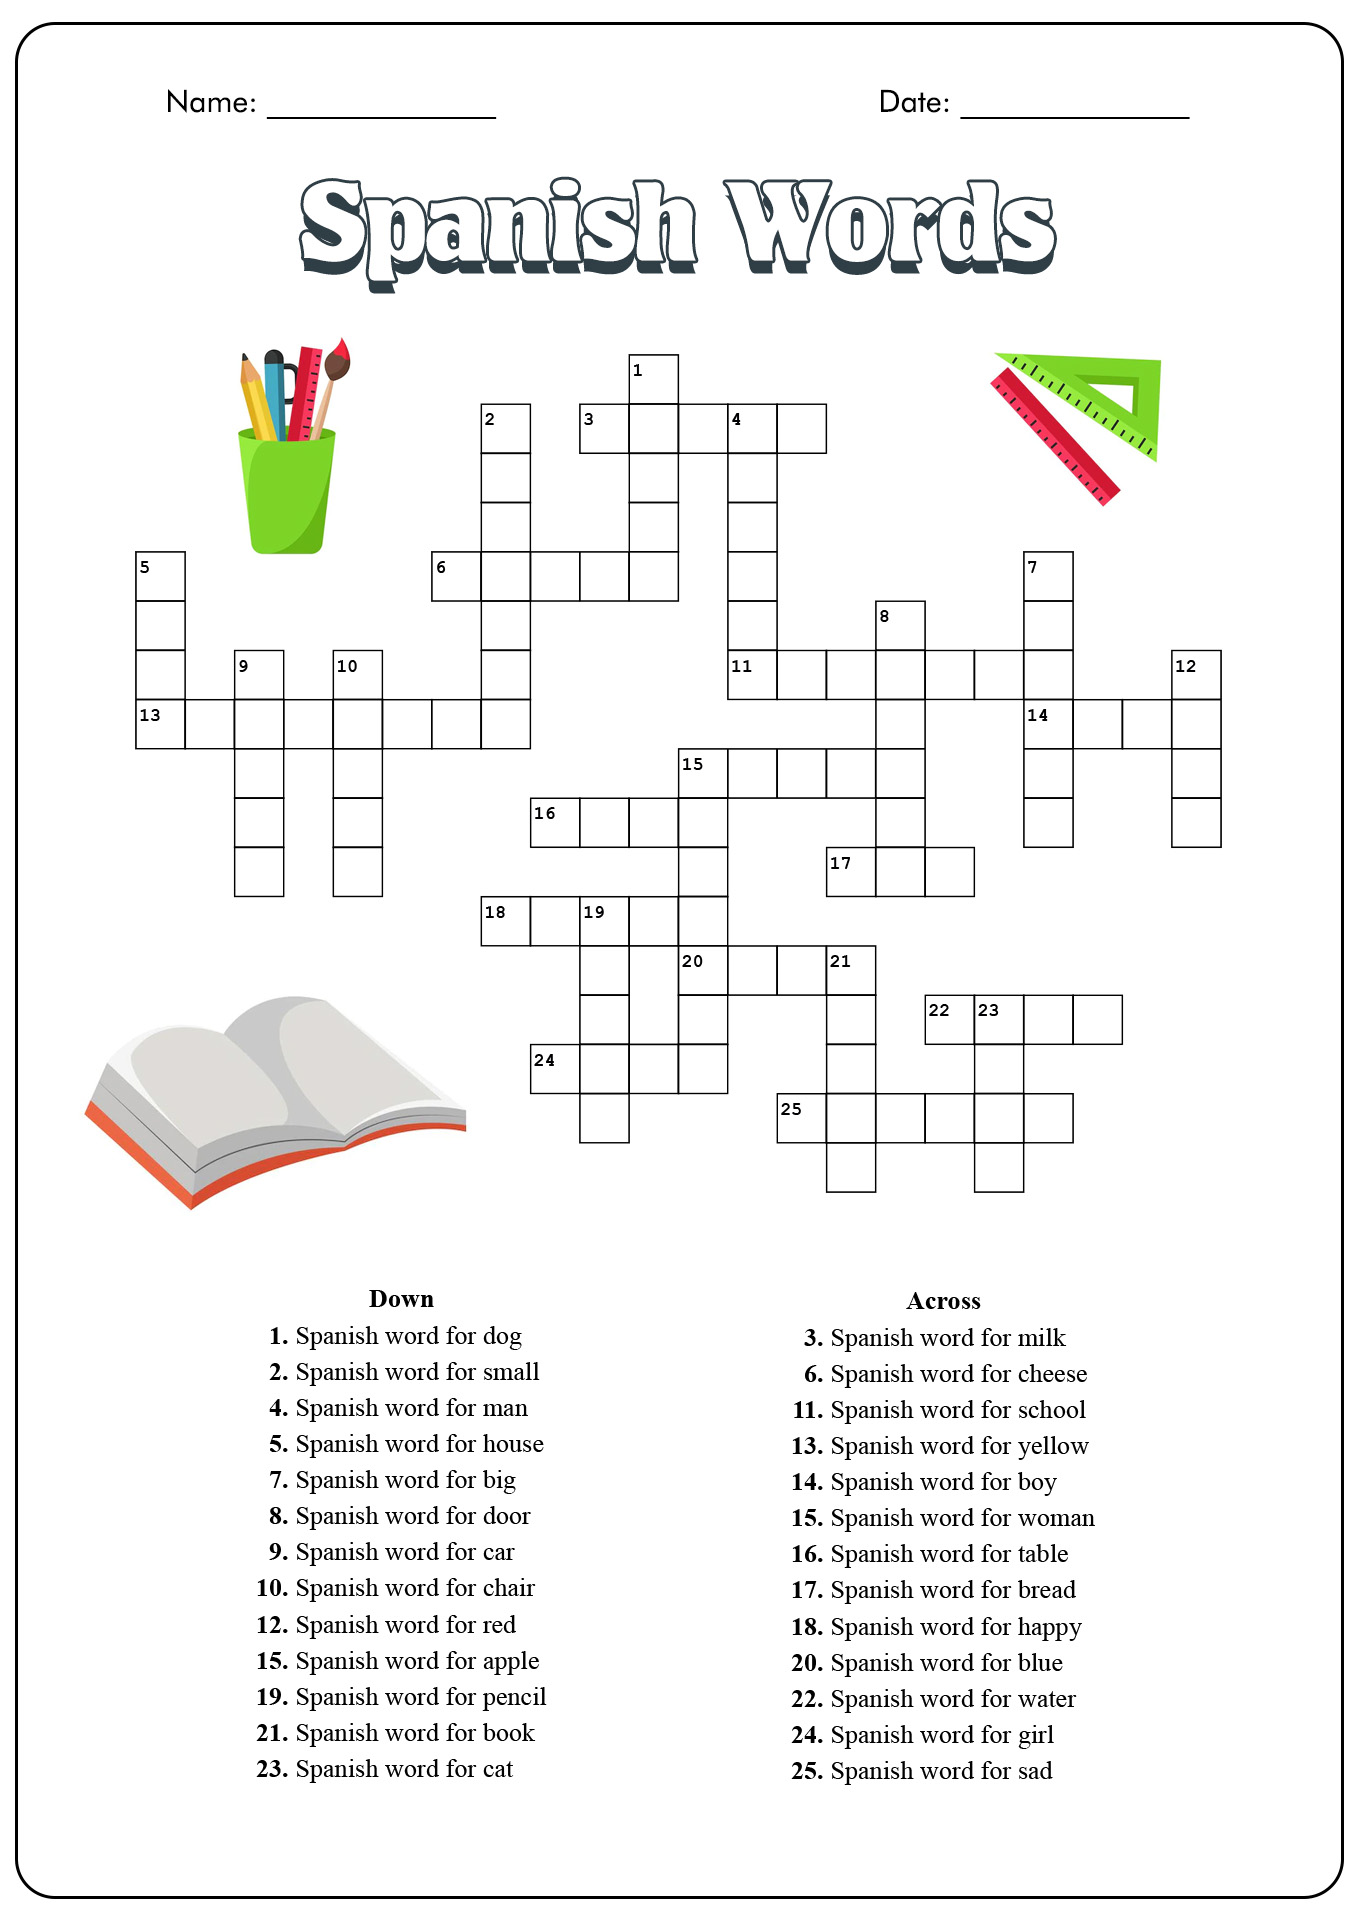 free-printable-spanish-word-search-puzzle-with-answer-key-pdf-best